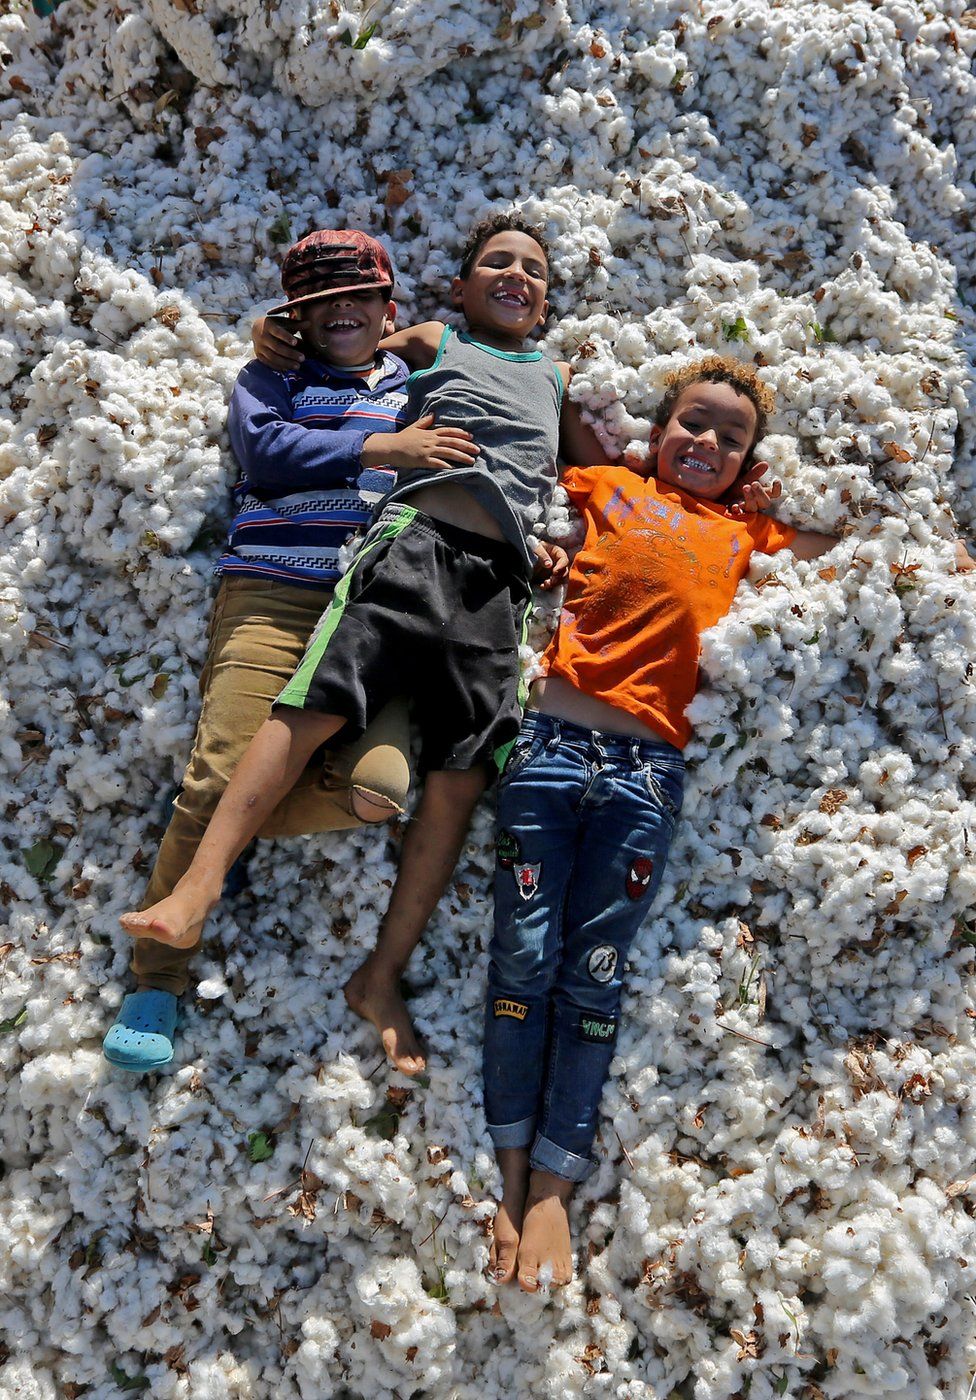 Children play on top of cotton bolls.